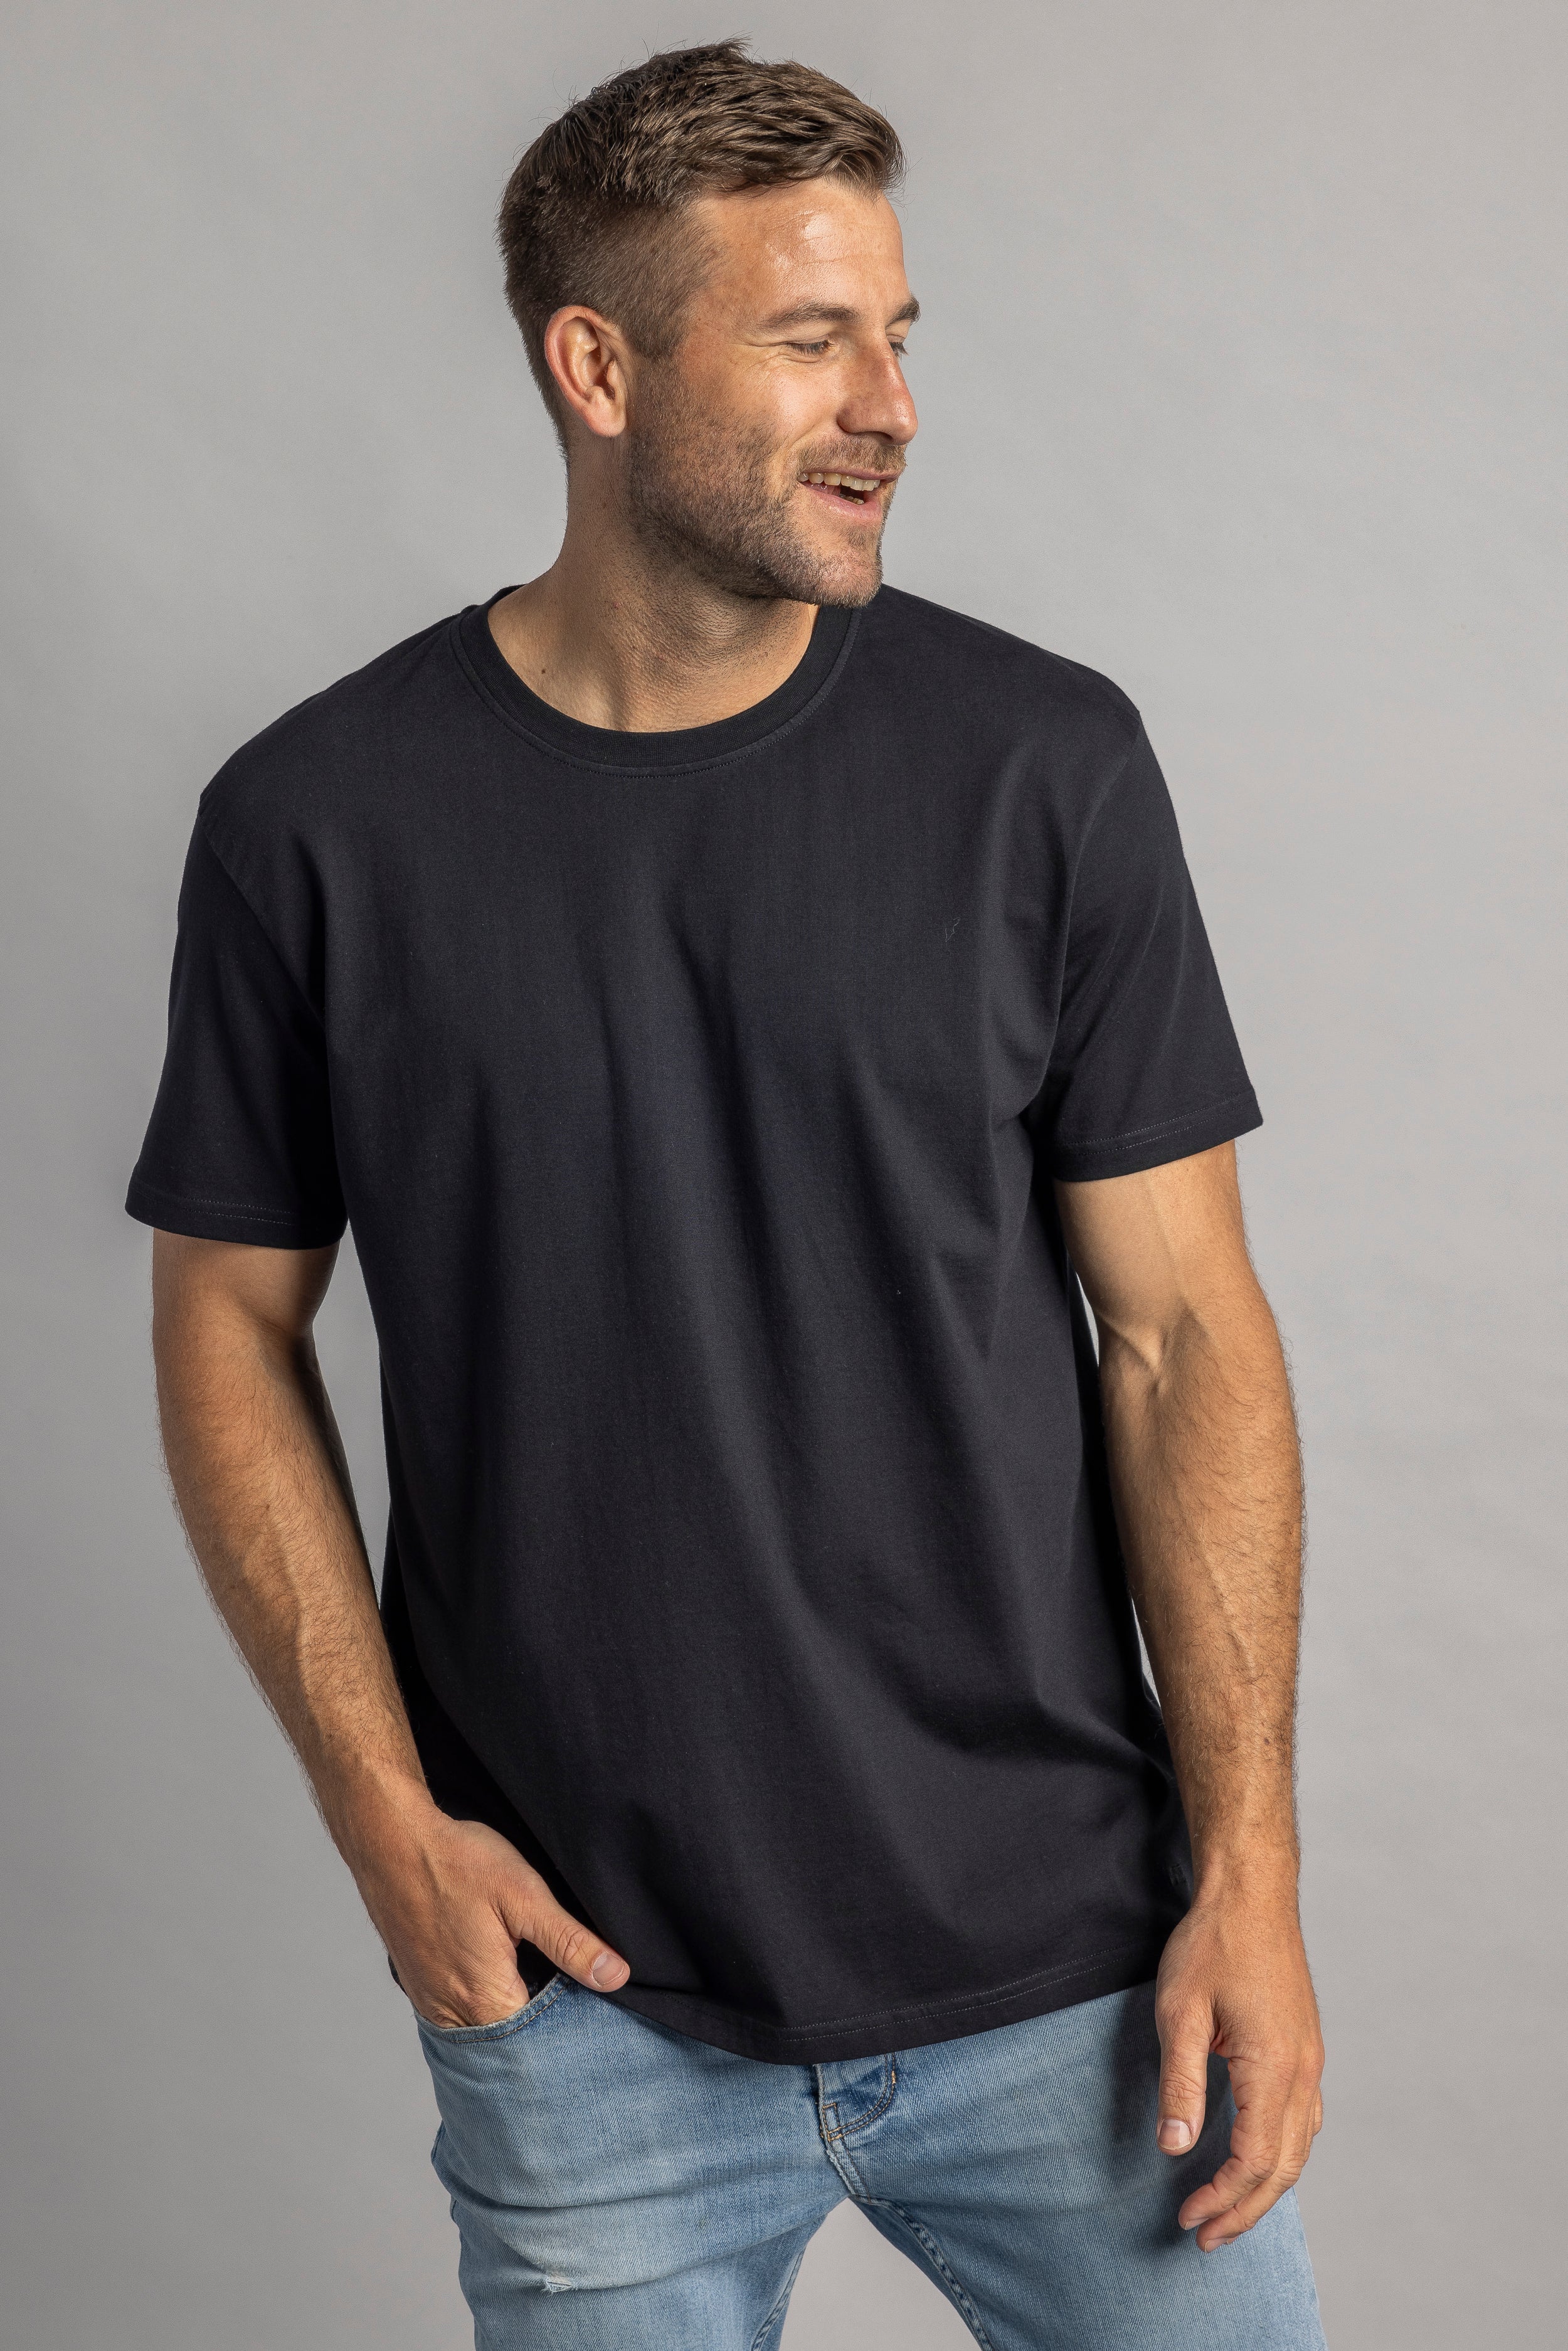 Black T-shirt Premium Blank Standard made from 100% organic cotton from DIRTS